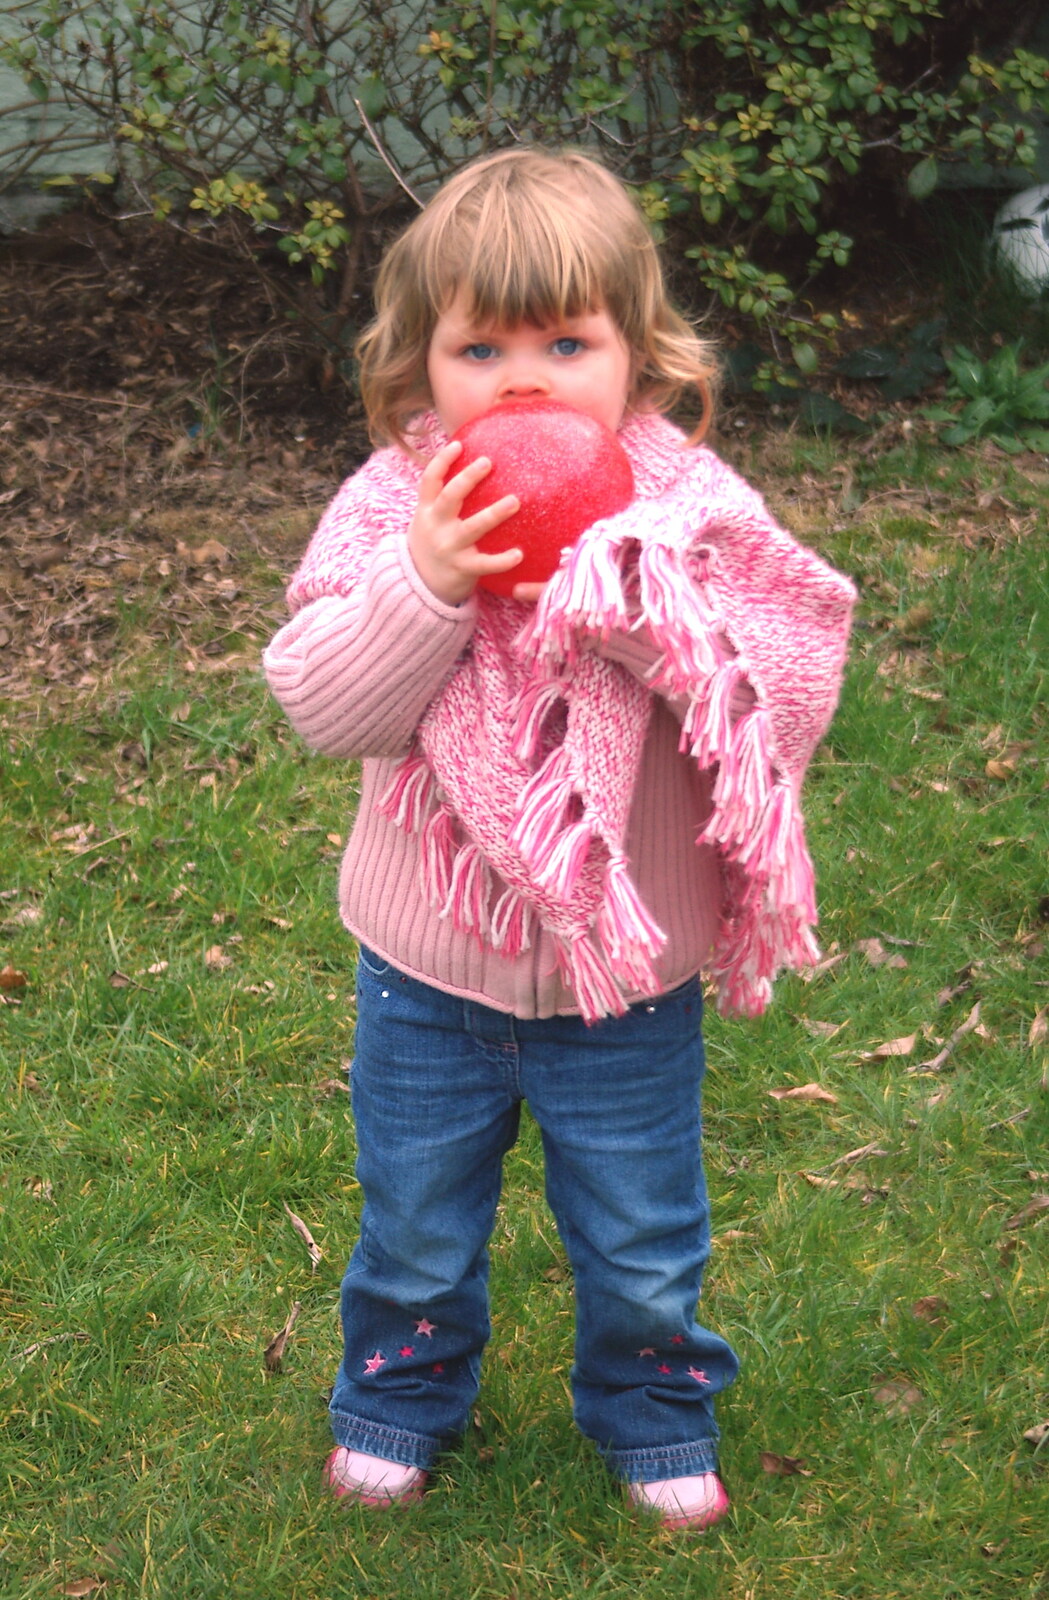 Syd with a ball from A Walk Around Lymington, and Luke Leaves Qualcomm Cambridge - 13th March 2005